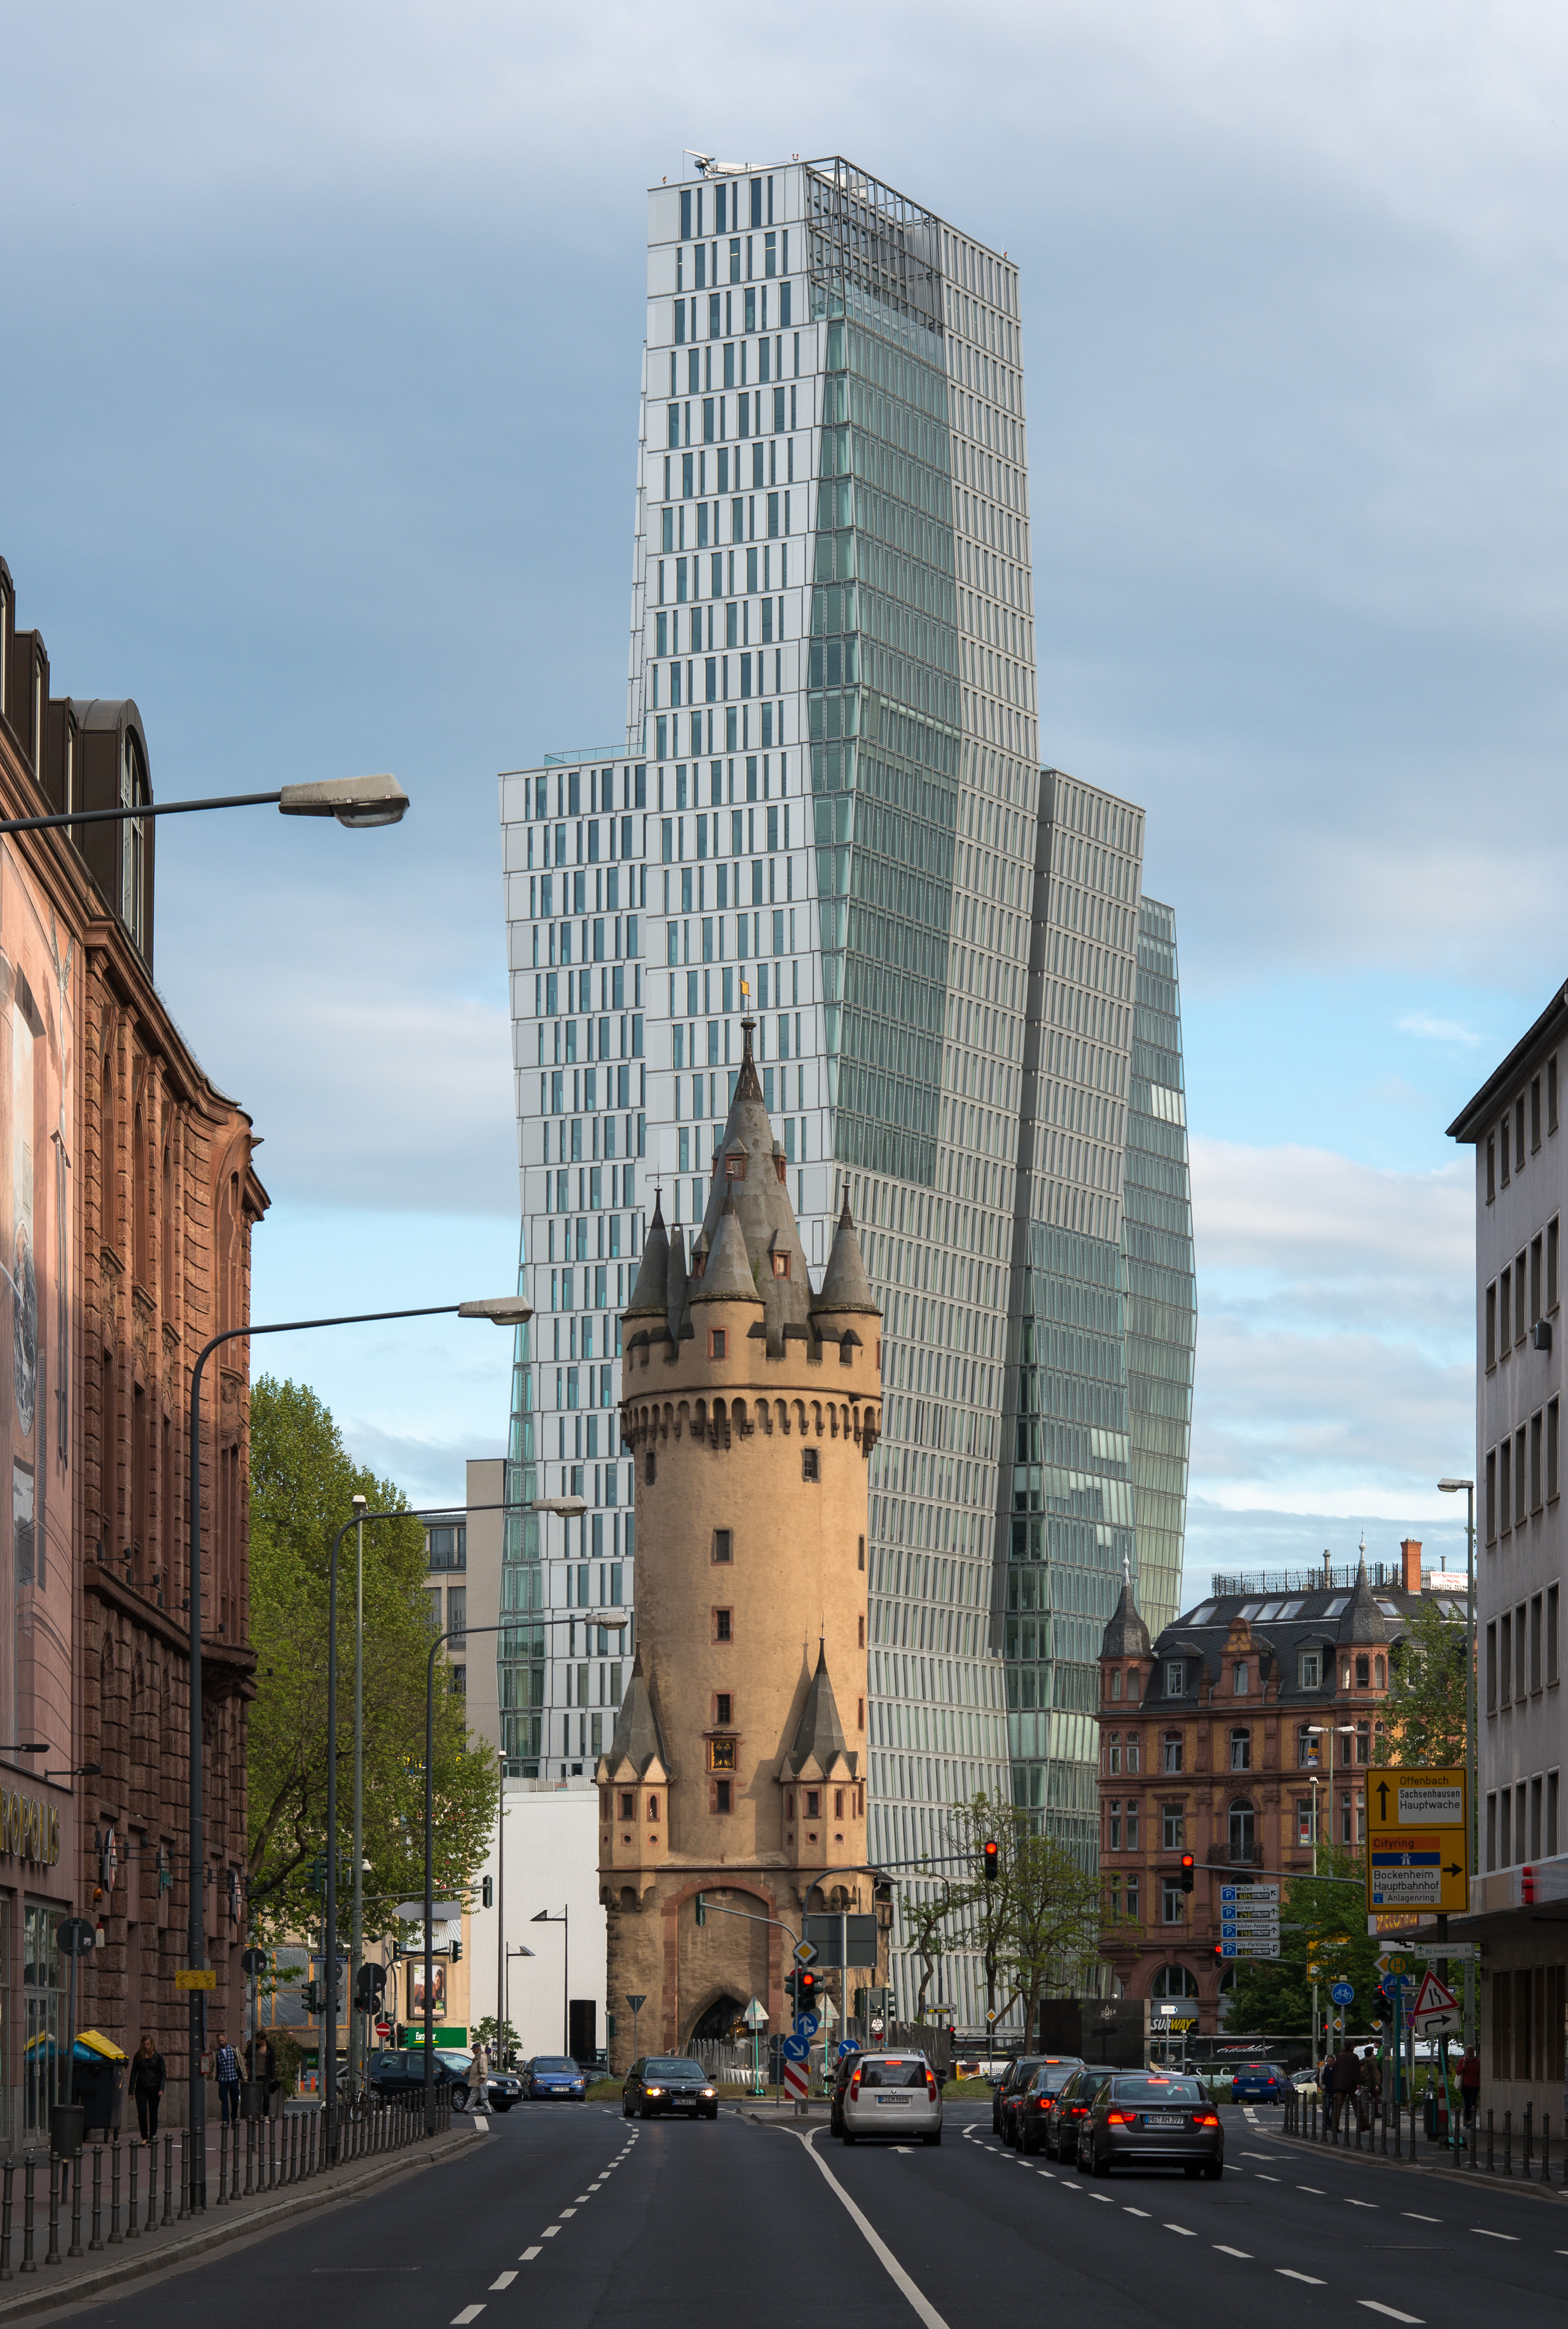 600-year-old tower in front of a modern high-rise in Frankfurt - Imgur